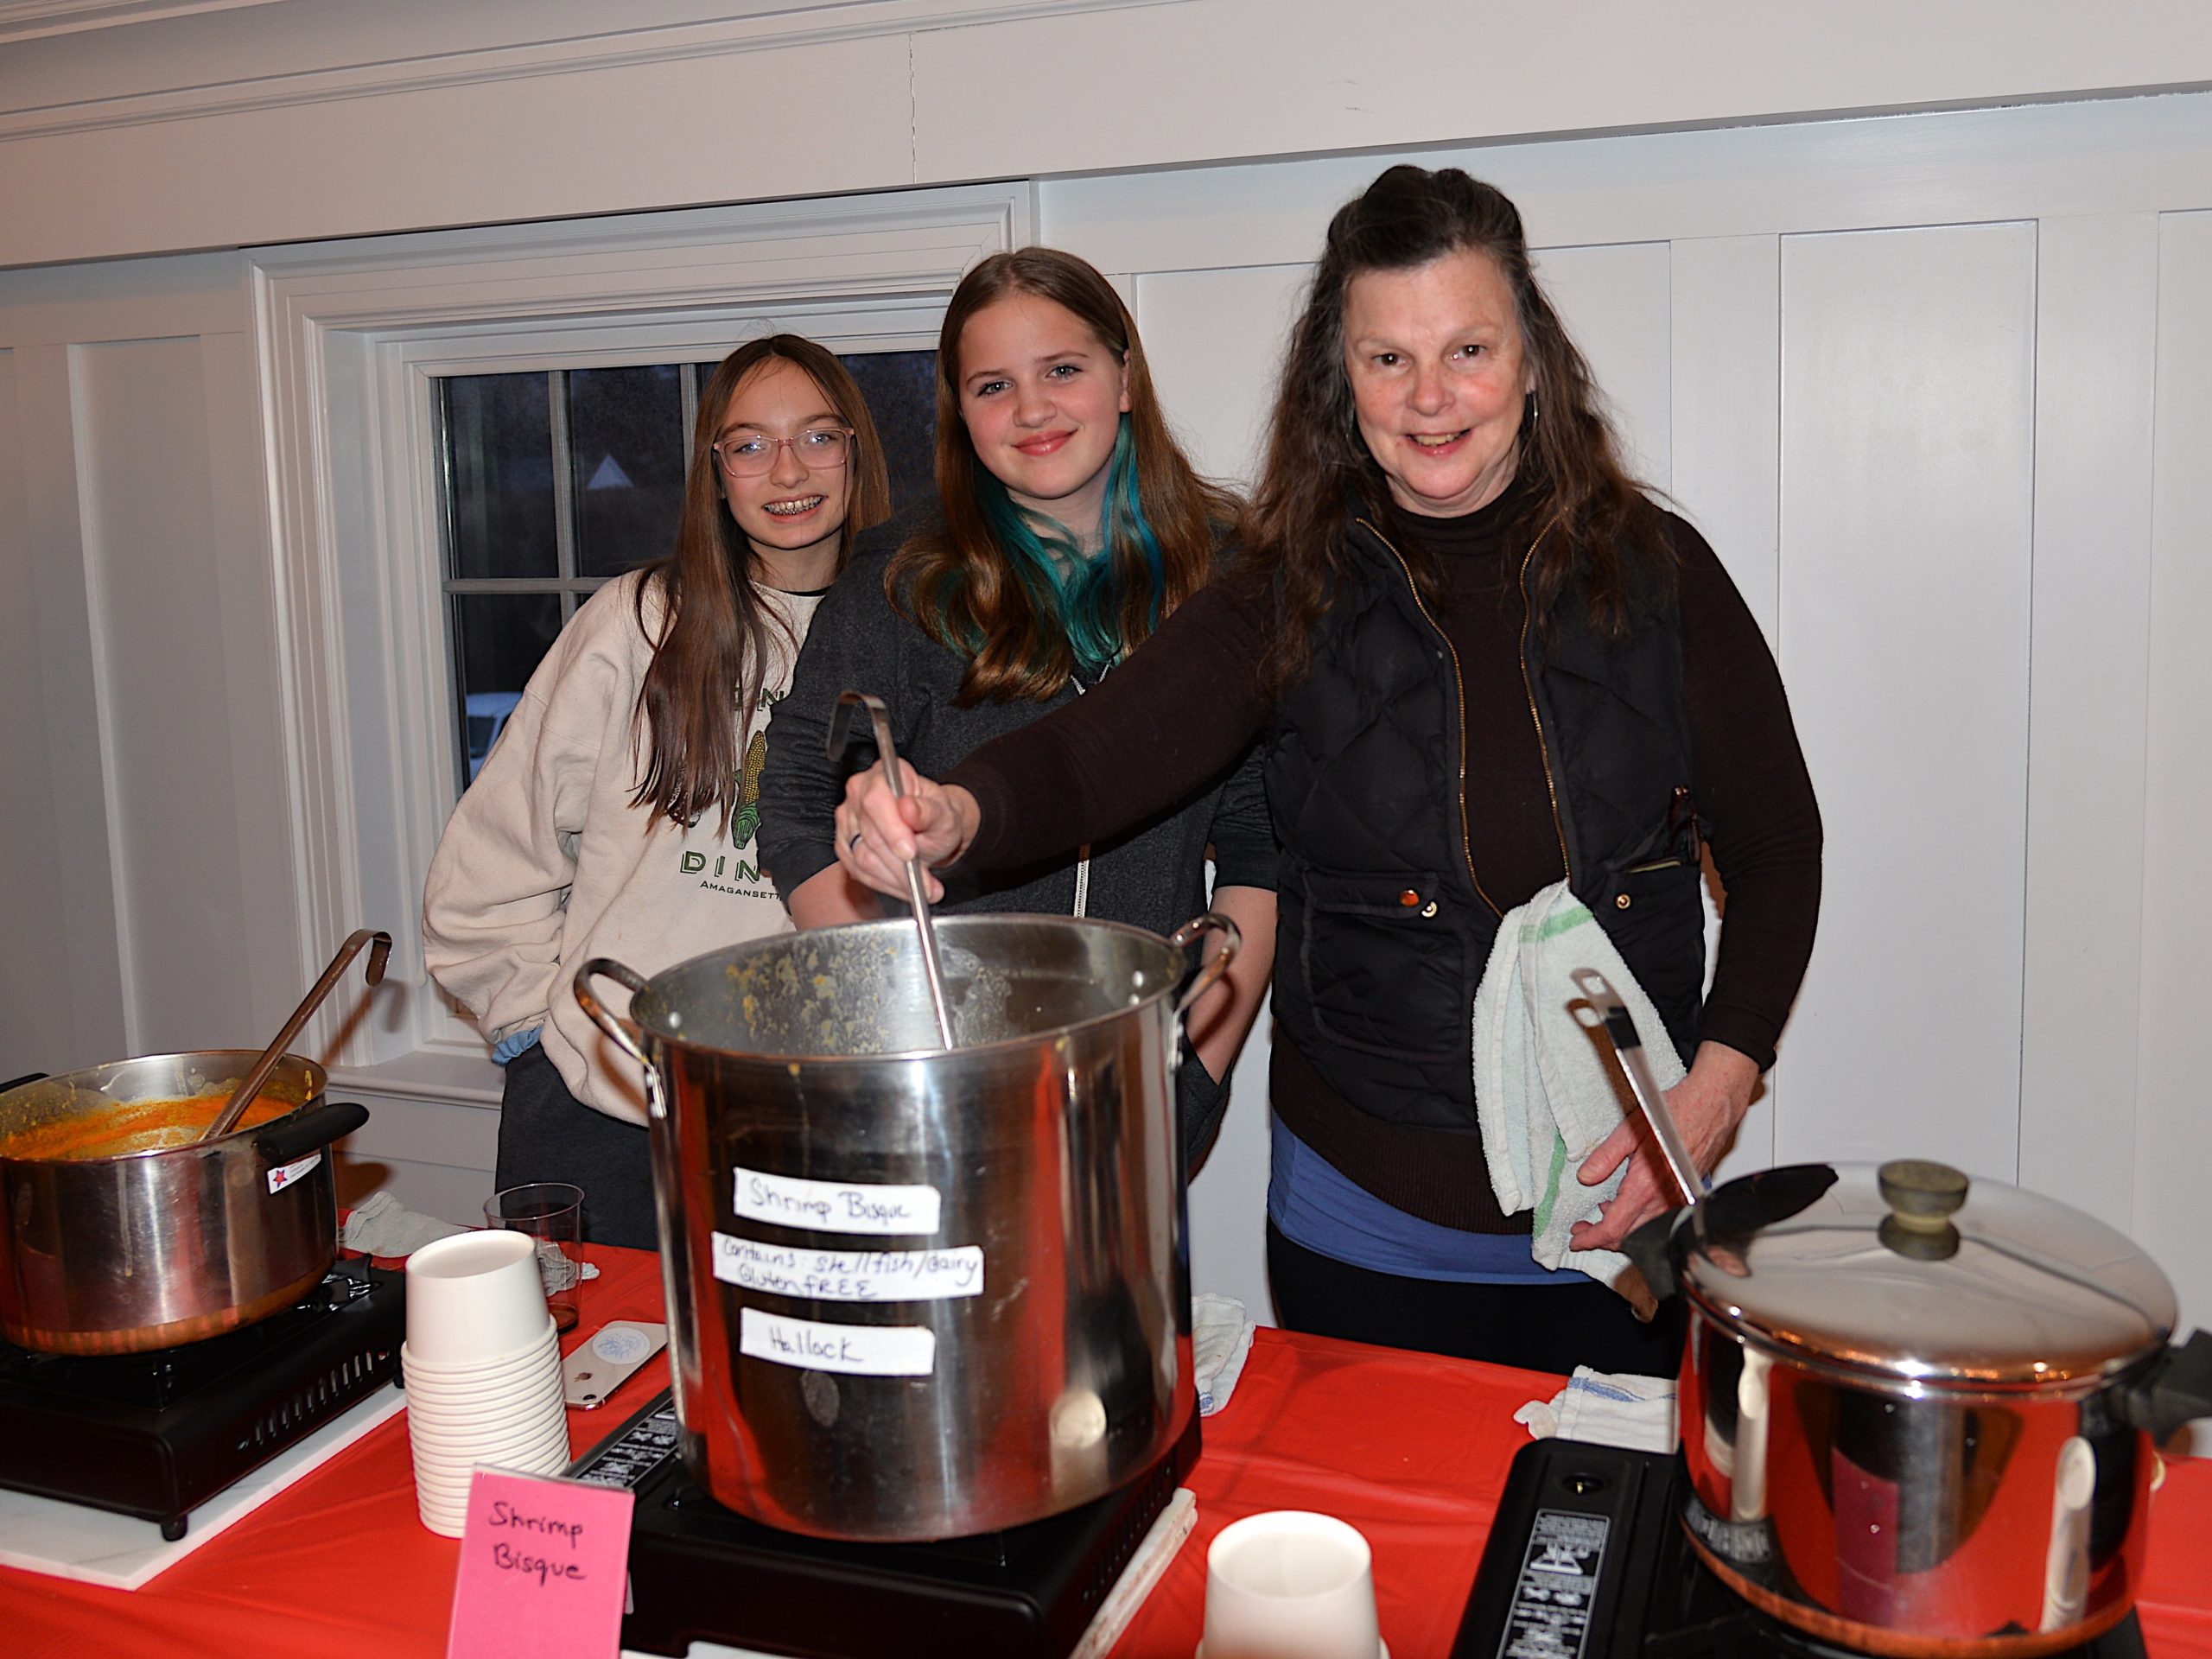 The deacons of the Amagansett Presbyterian Church hosted a Soup and Chili dinner on Saturday. Ea Feleppa, Emma Hallock and Betsy Martin are ready to serve it up. KYRIL BROMLEY 